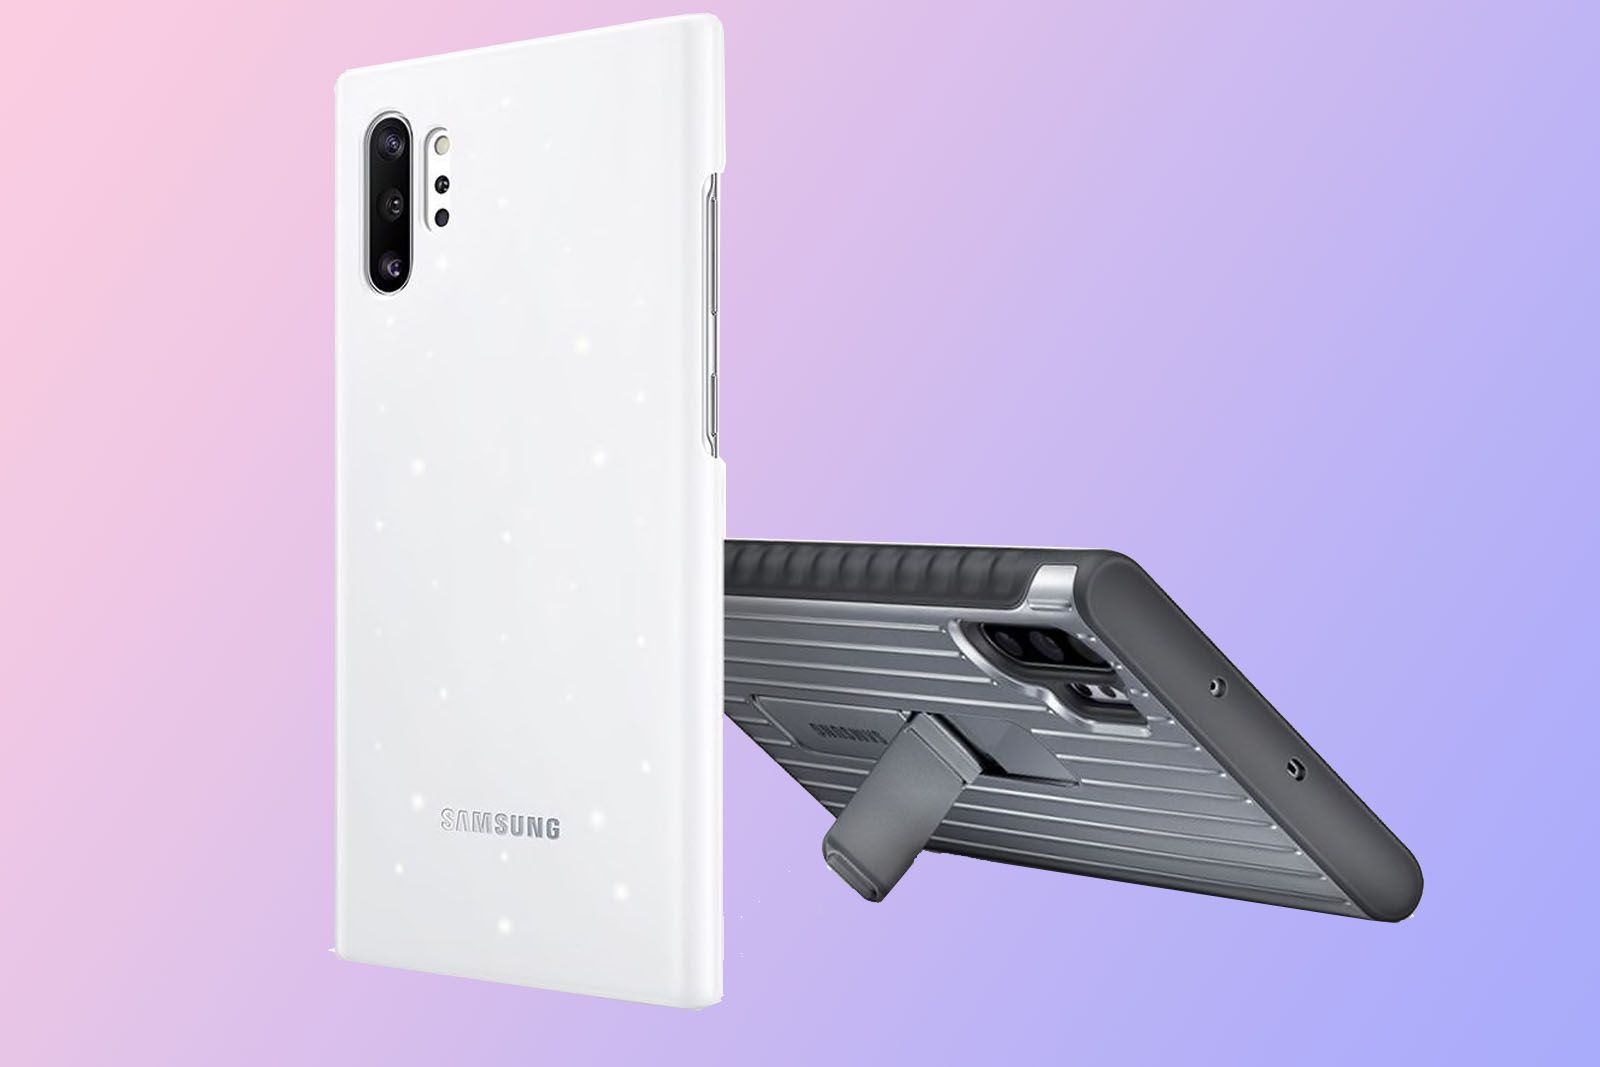 Best Note 10 And Note 10 Cases Protect Your New Samsung Phone image 1